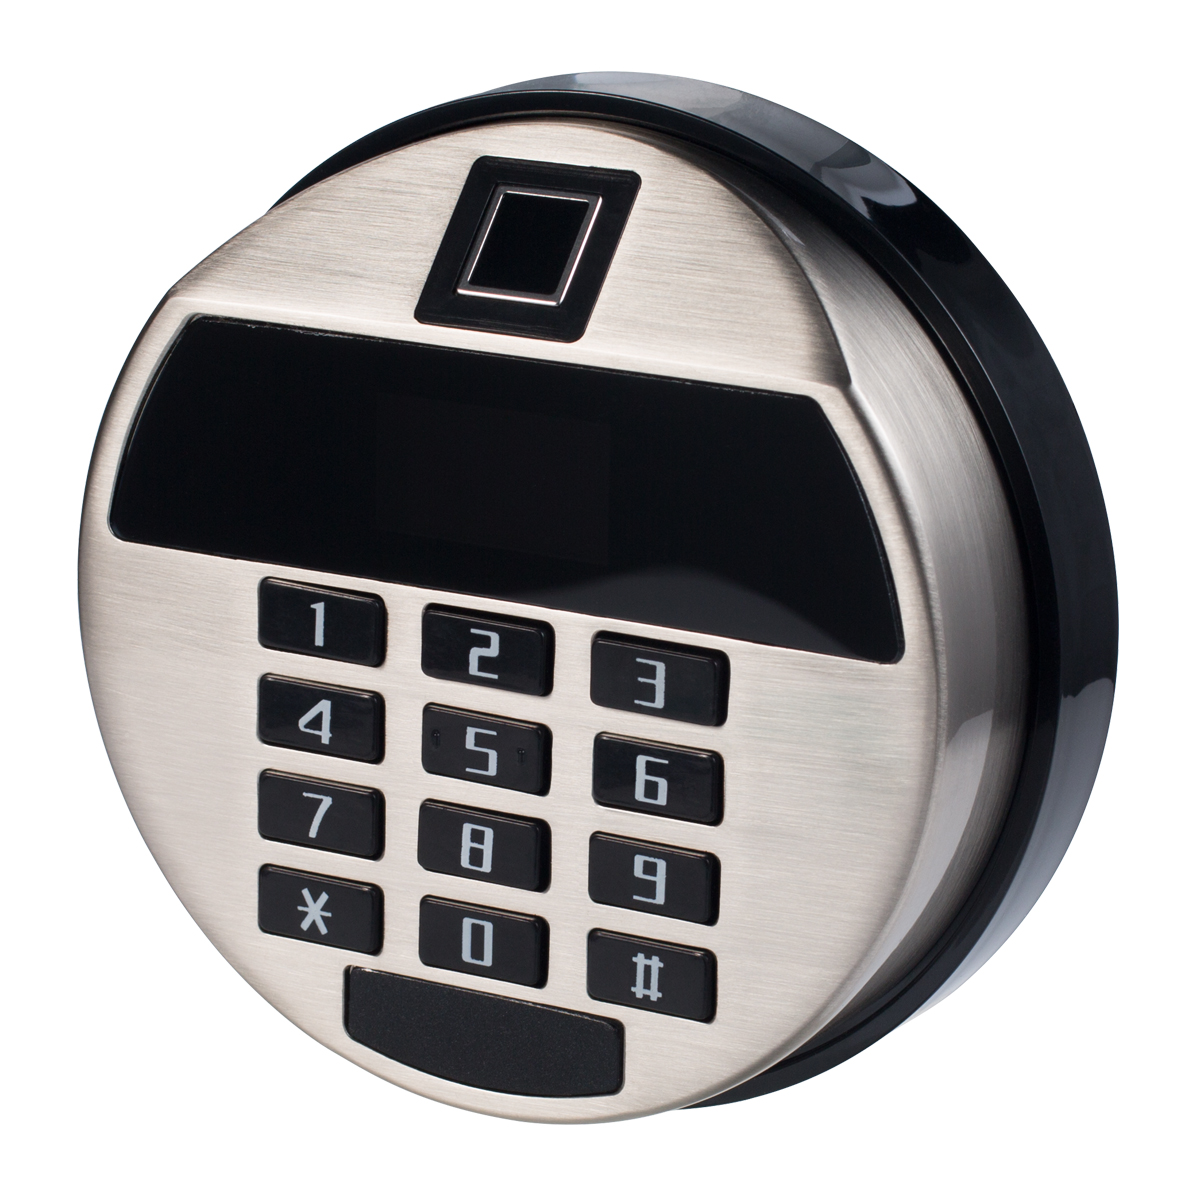 kcolefas electronic safe lock entry 30273 with display and fingerprint input